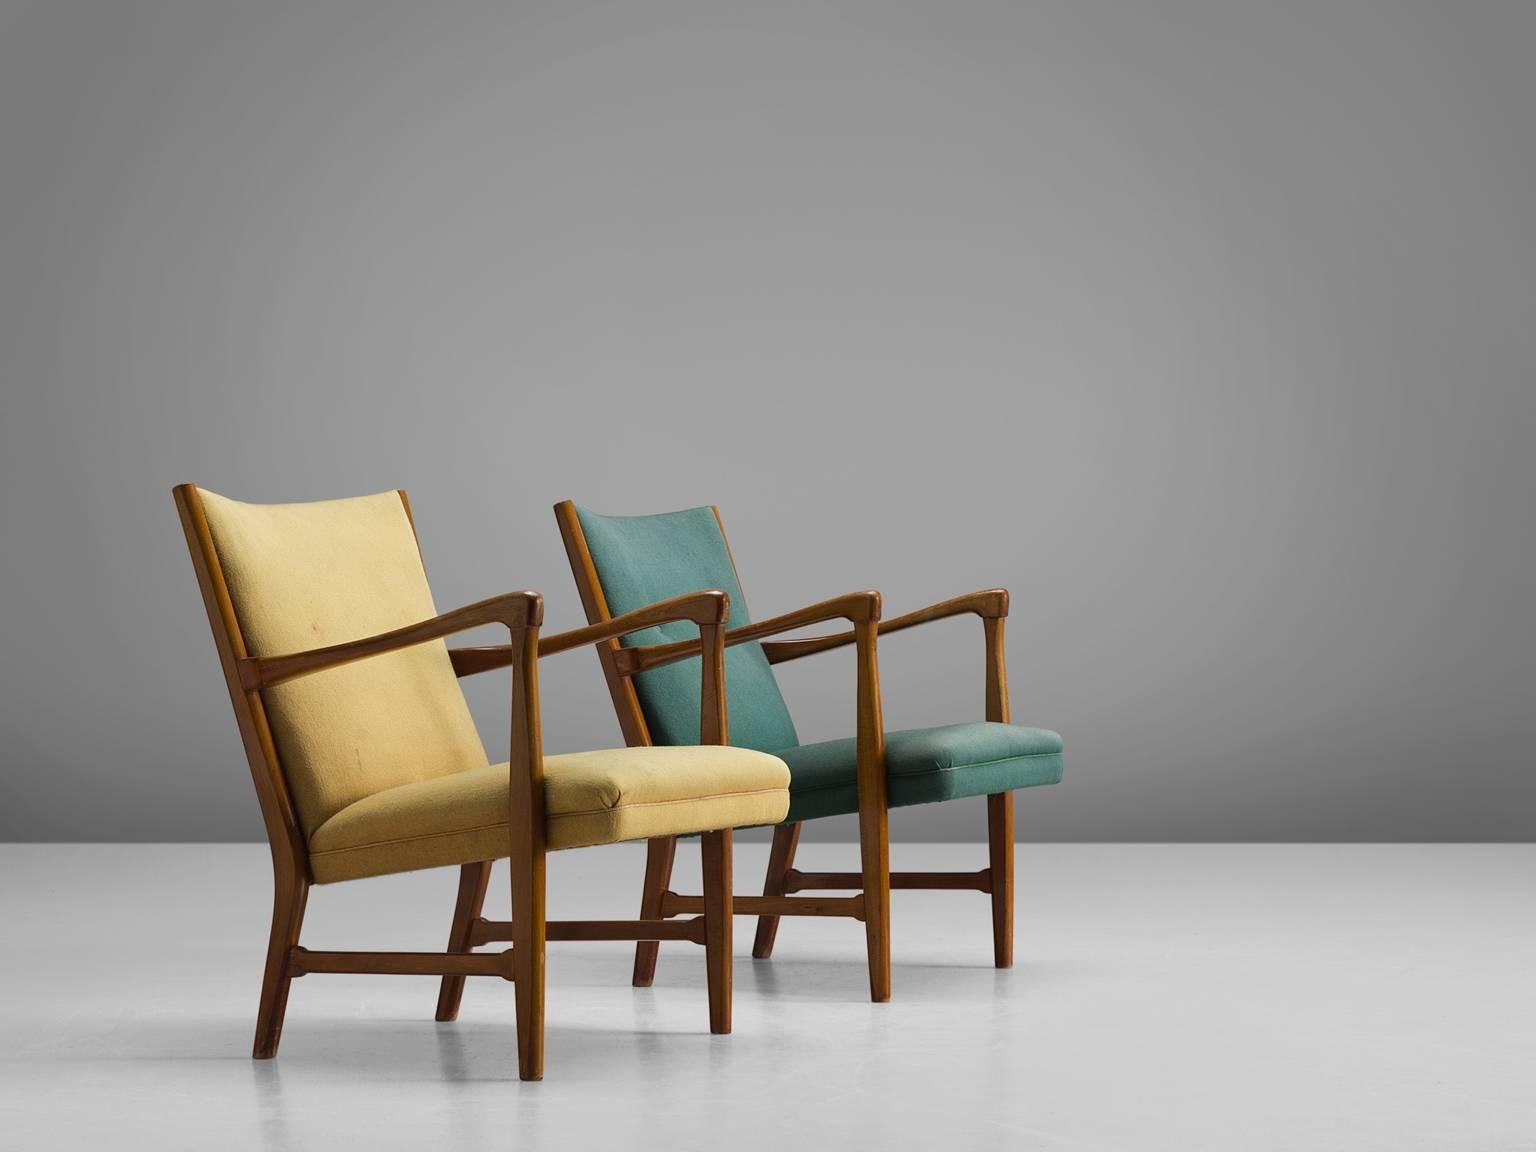 Armchairs, yellow and green fabric and wood, Denmark, 1950s.

This stately and well-executed highback chair shows an exquisite level of craftsmanship. The lines and finishes in this set are both curvy and crisp. The frame shows traits of the